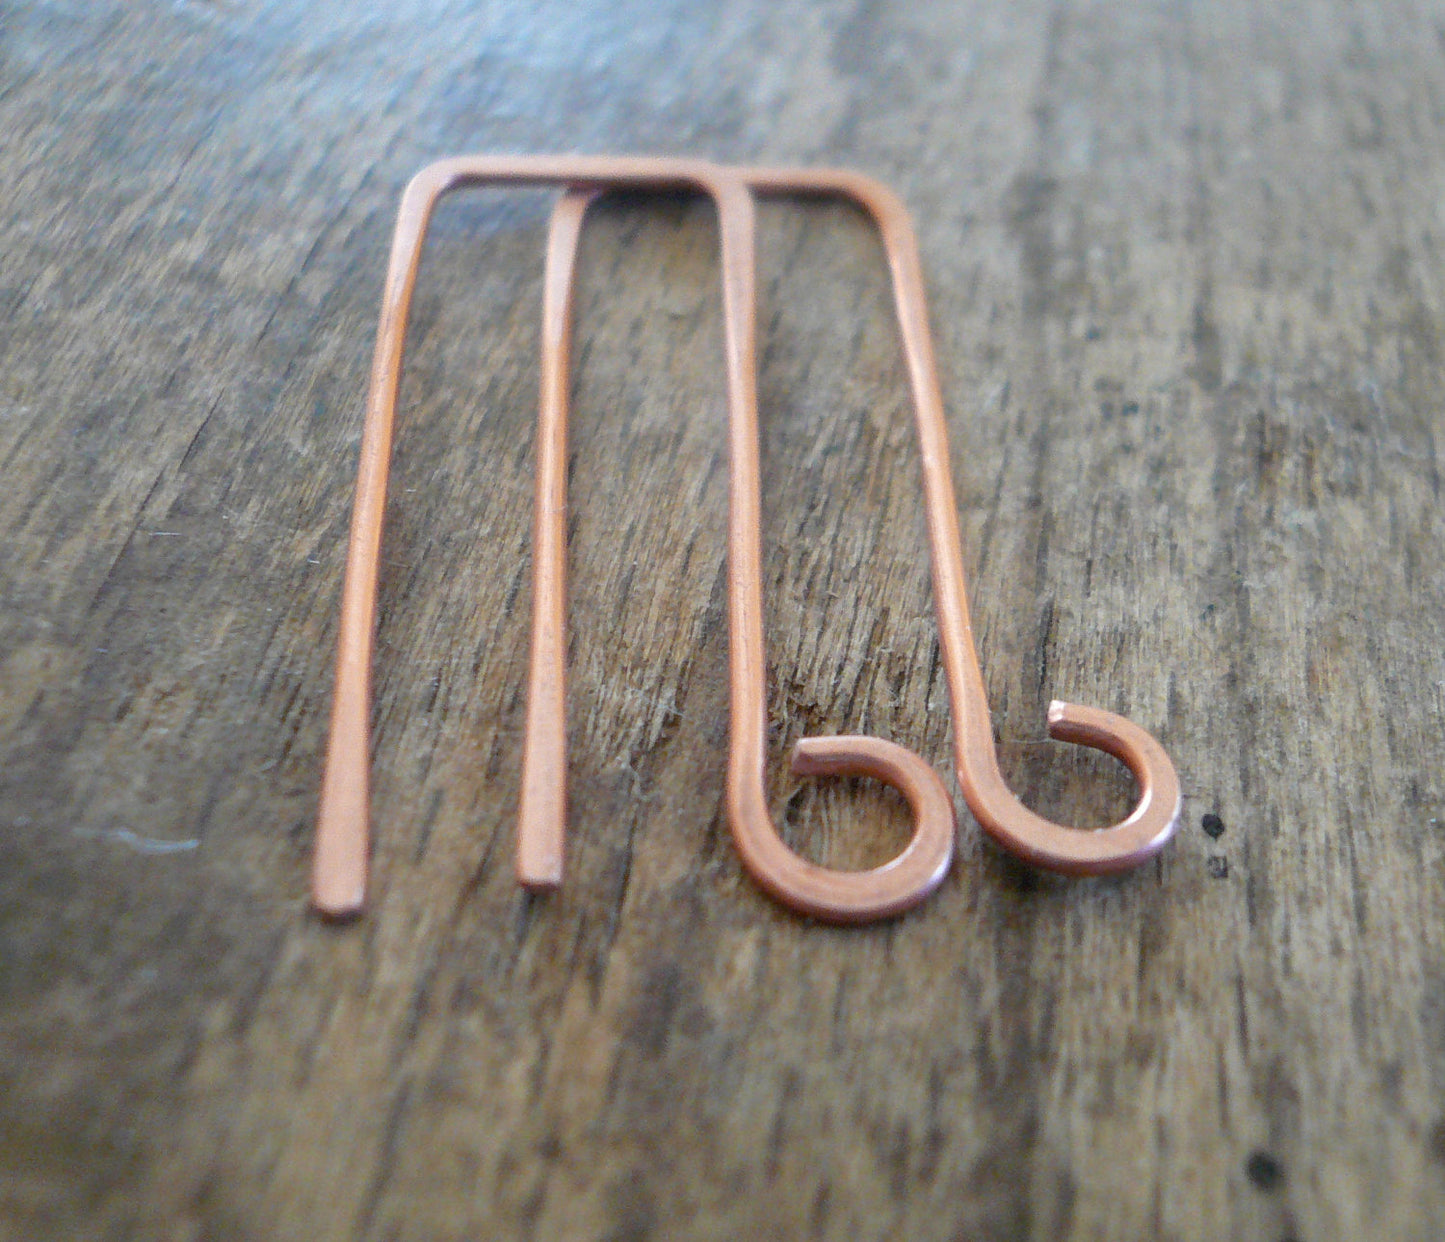 Millstone Antiqued Copper Earwires - Handmade. Handforged